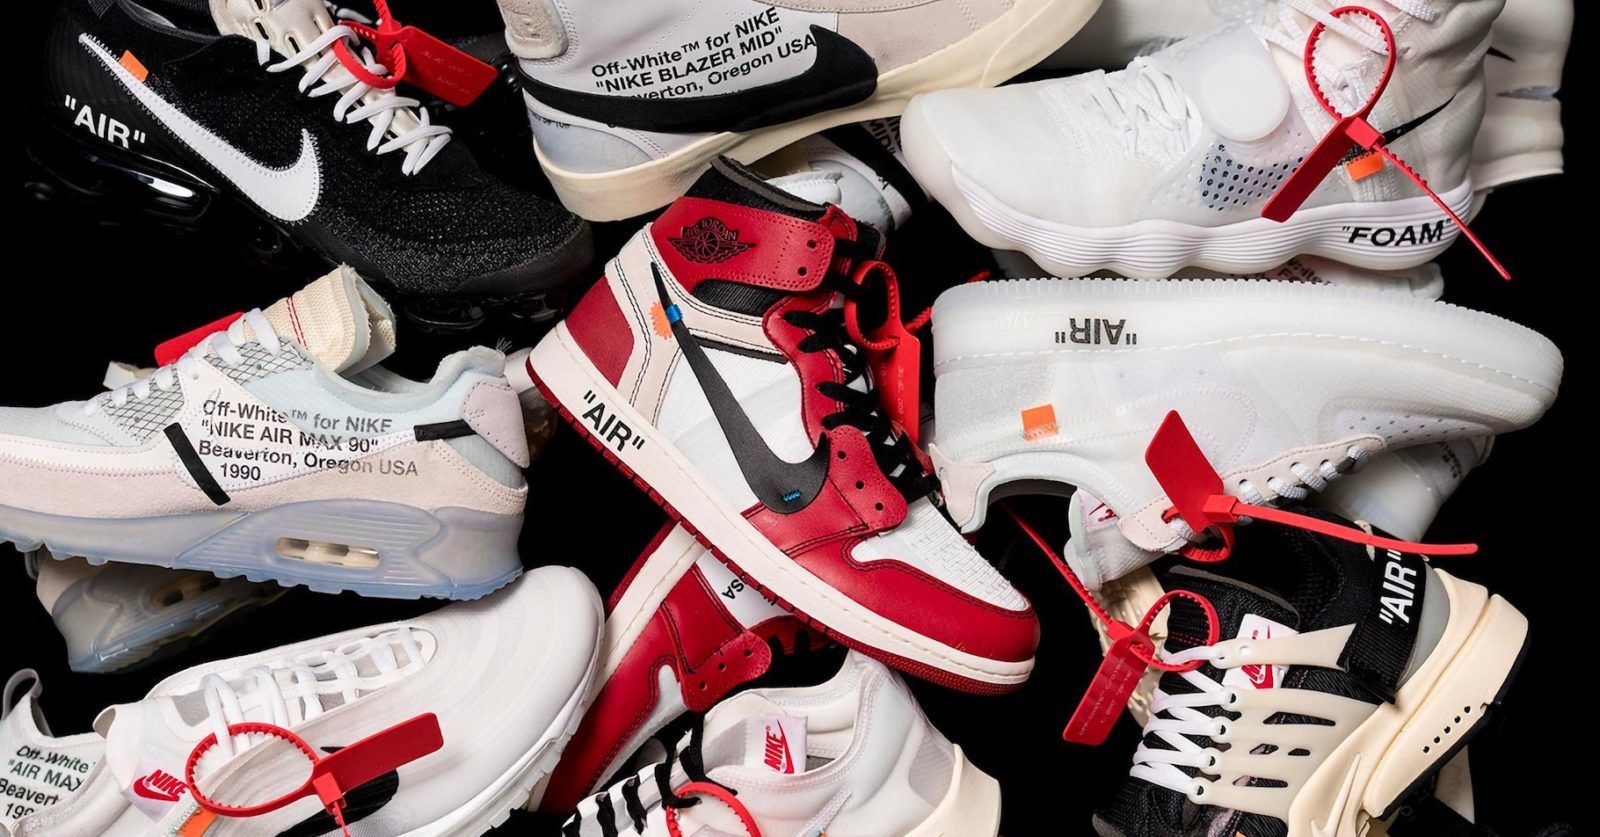 8 iconic sneakers by Virgil Abloh that redefined streetwear, fashion and art